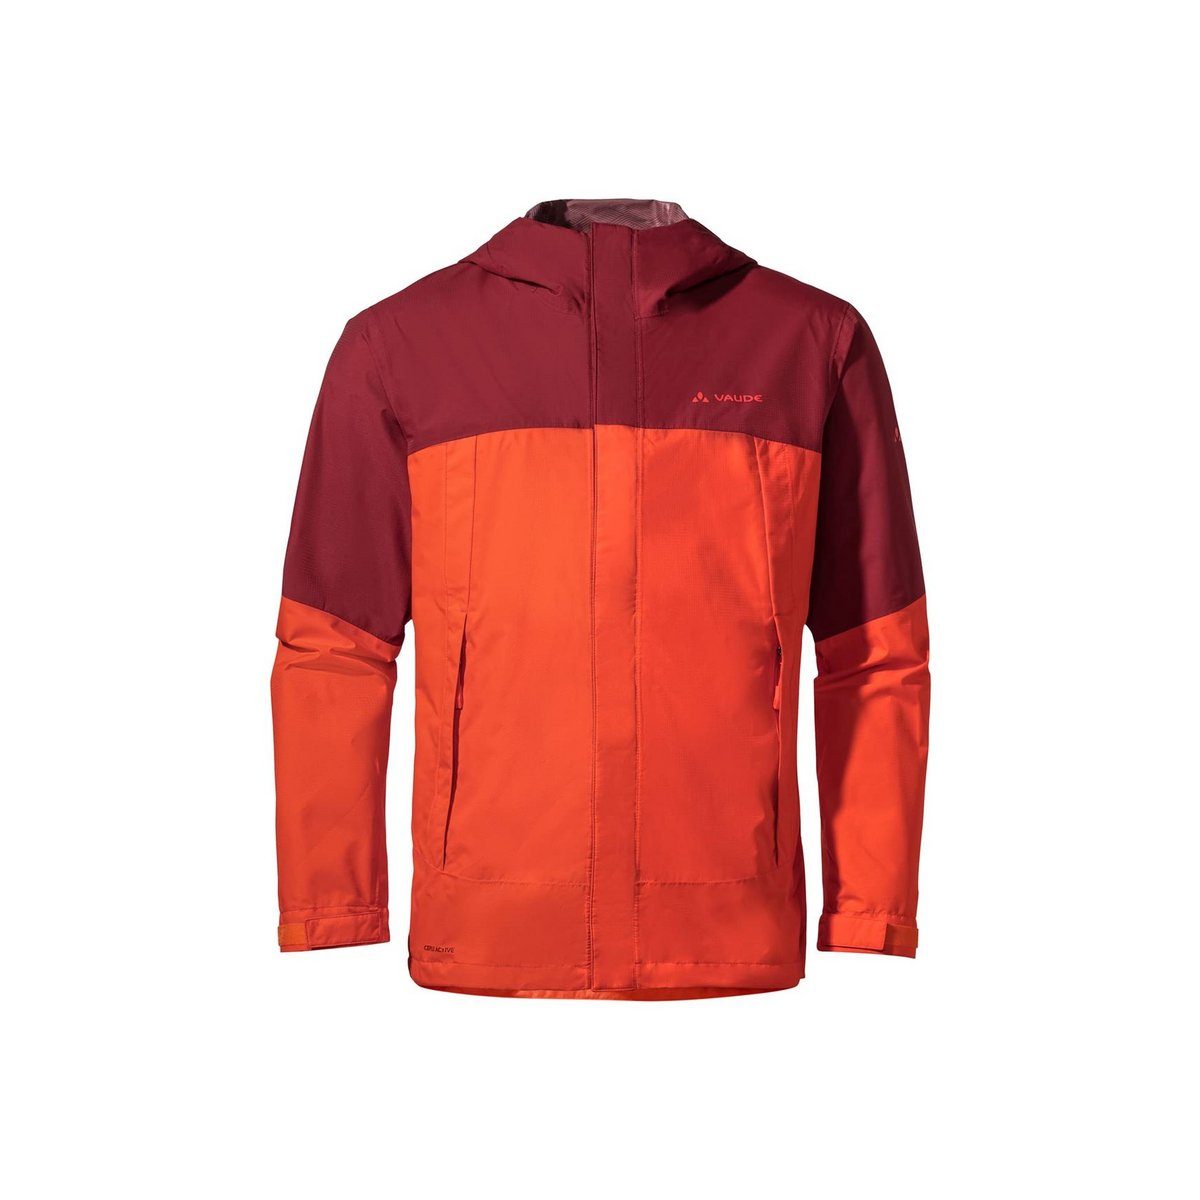 VAUDE Funktionsjacke rot sonstiges (1-St) glowing red